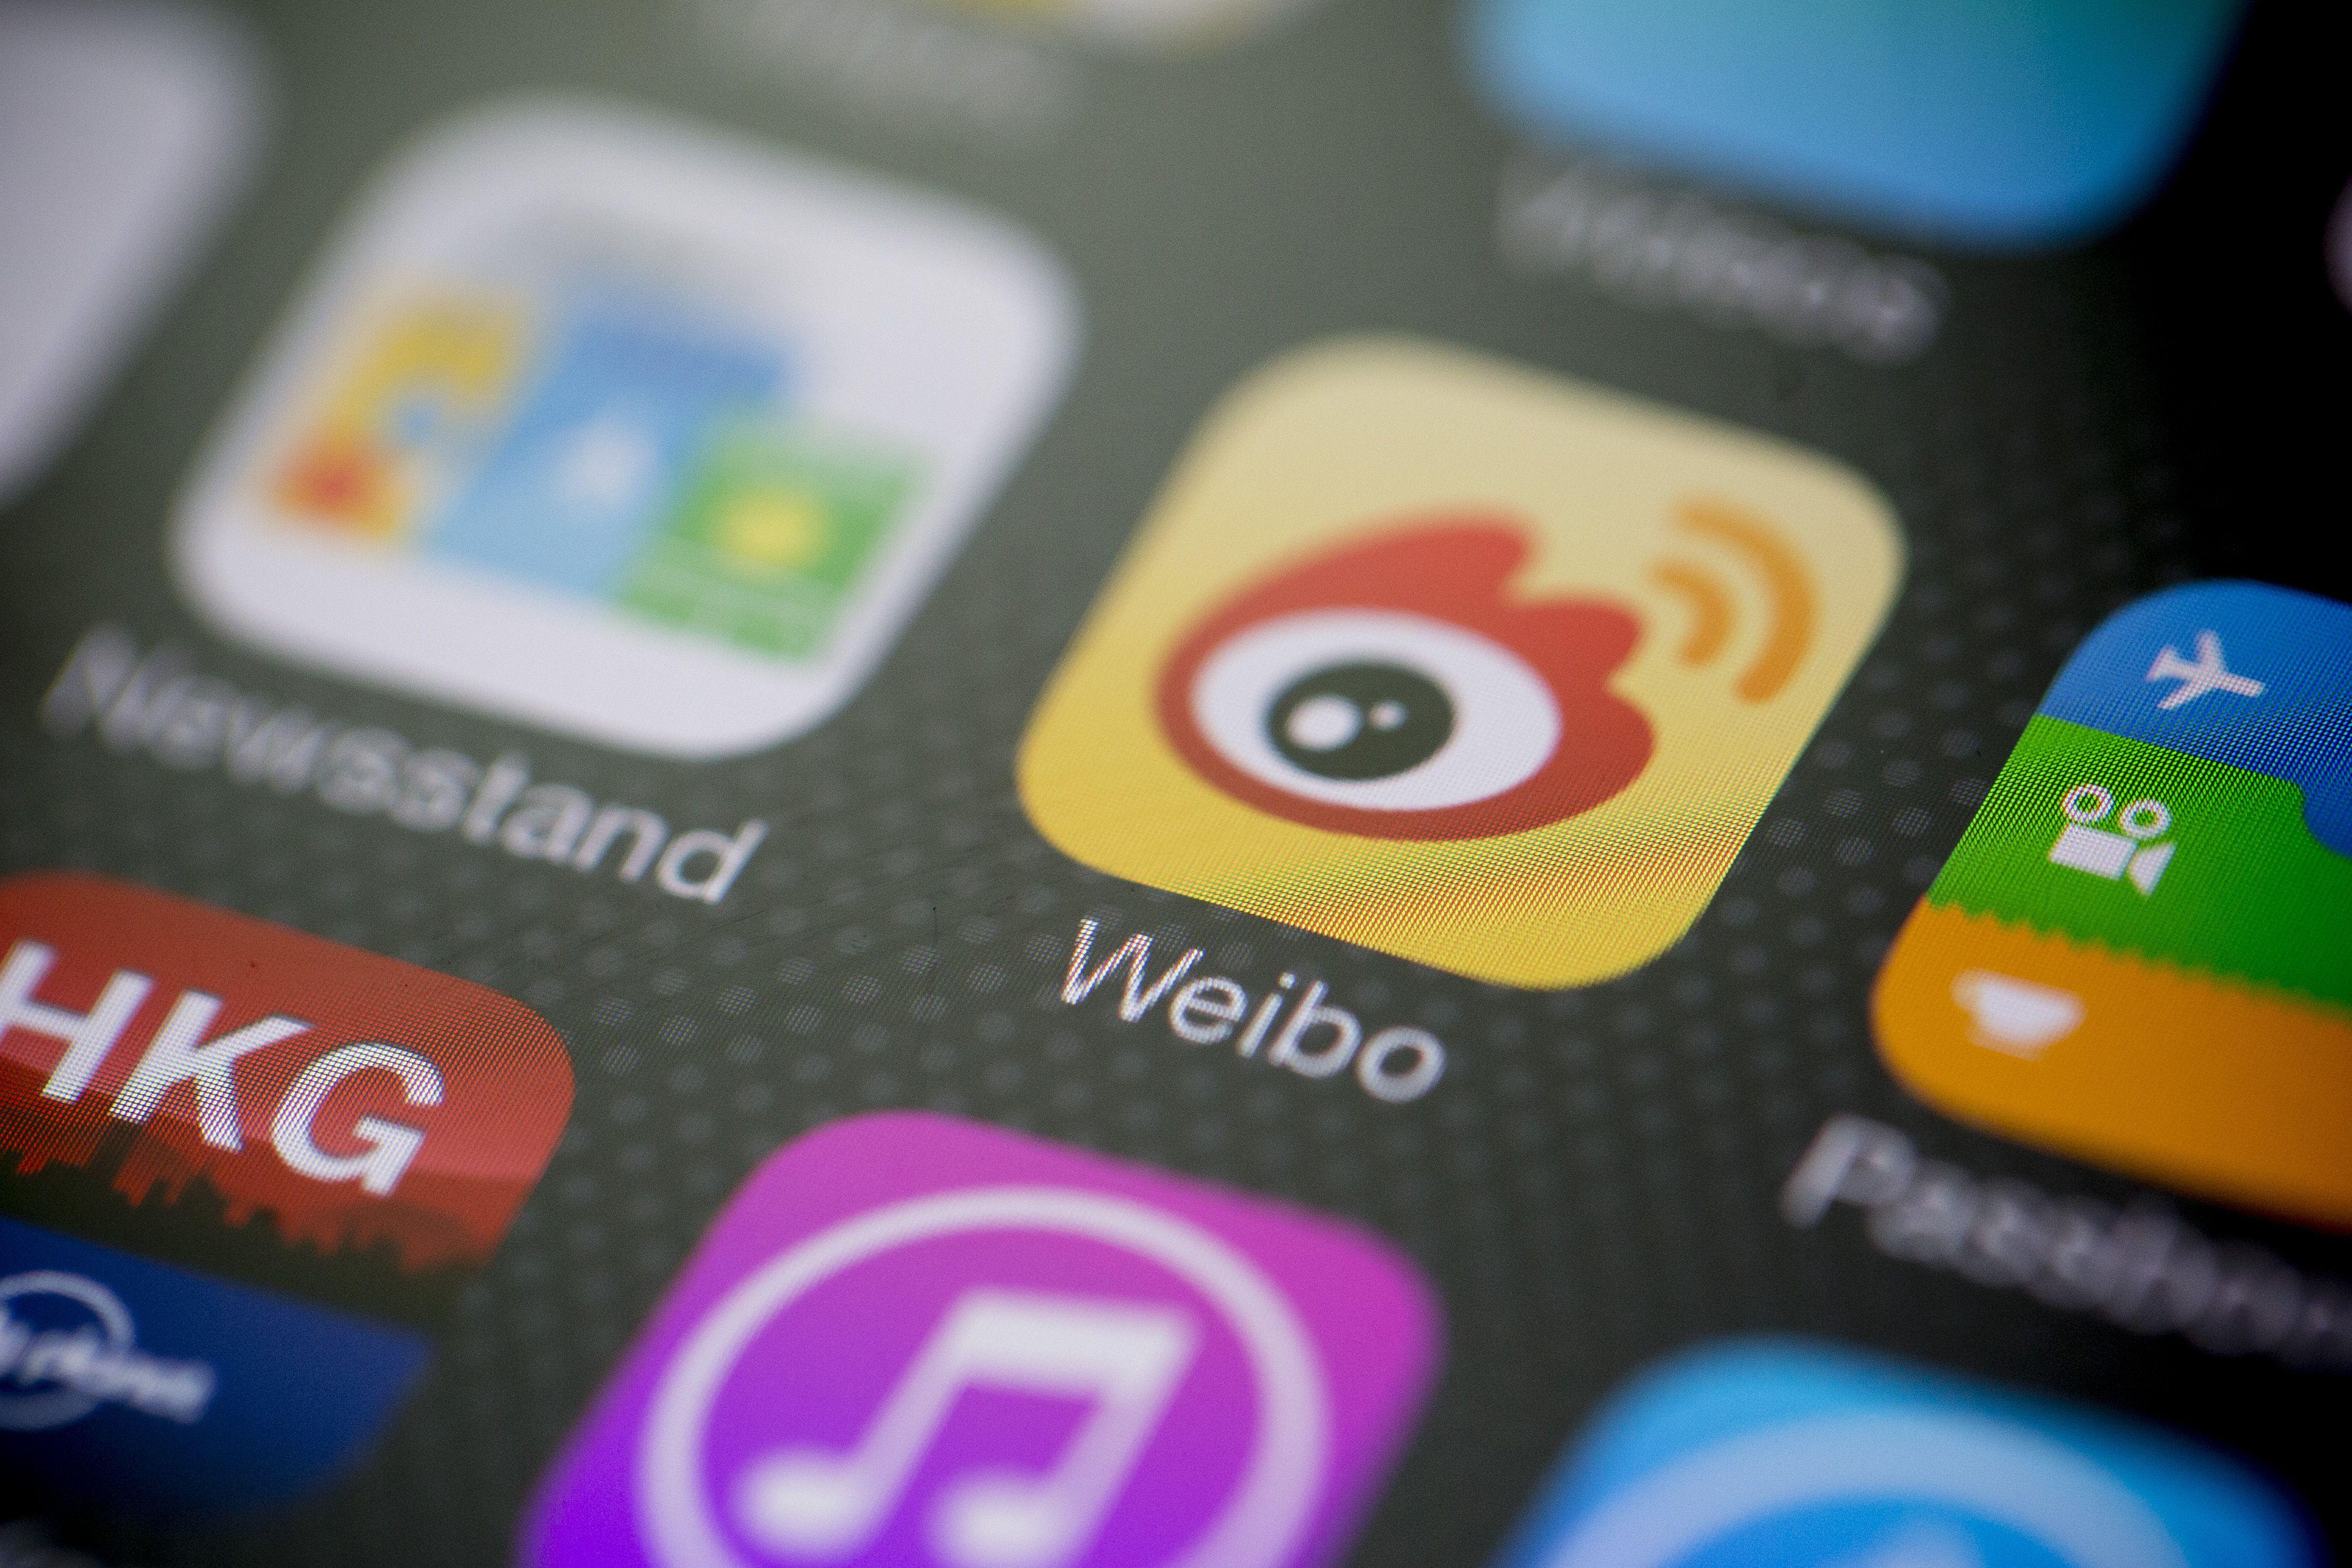 Weibo App Logo - China: Weibo Vows to Crack Down on Unapproved Video Content